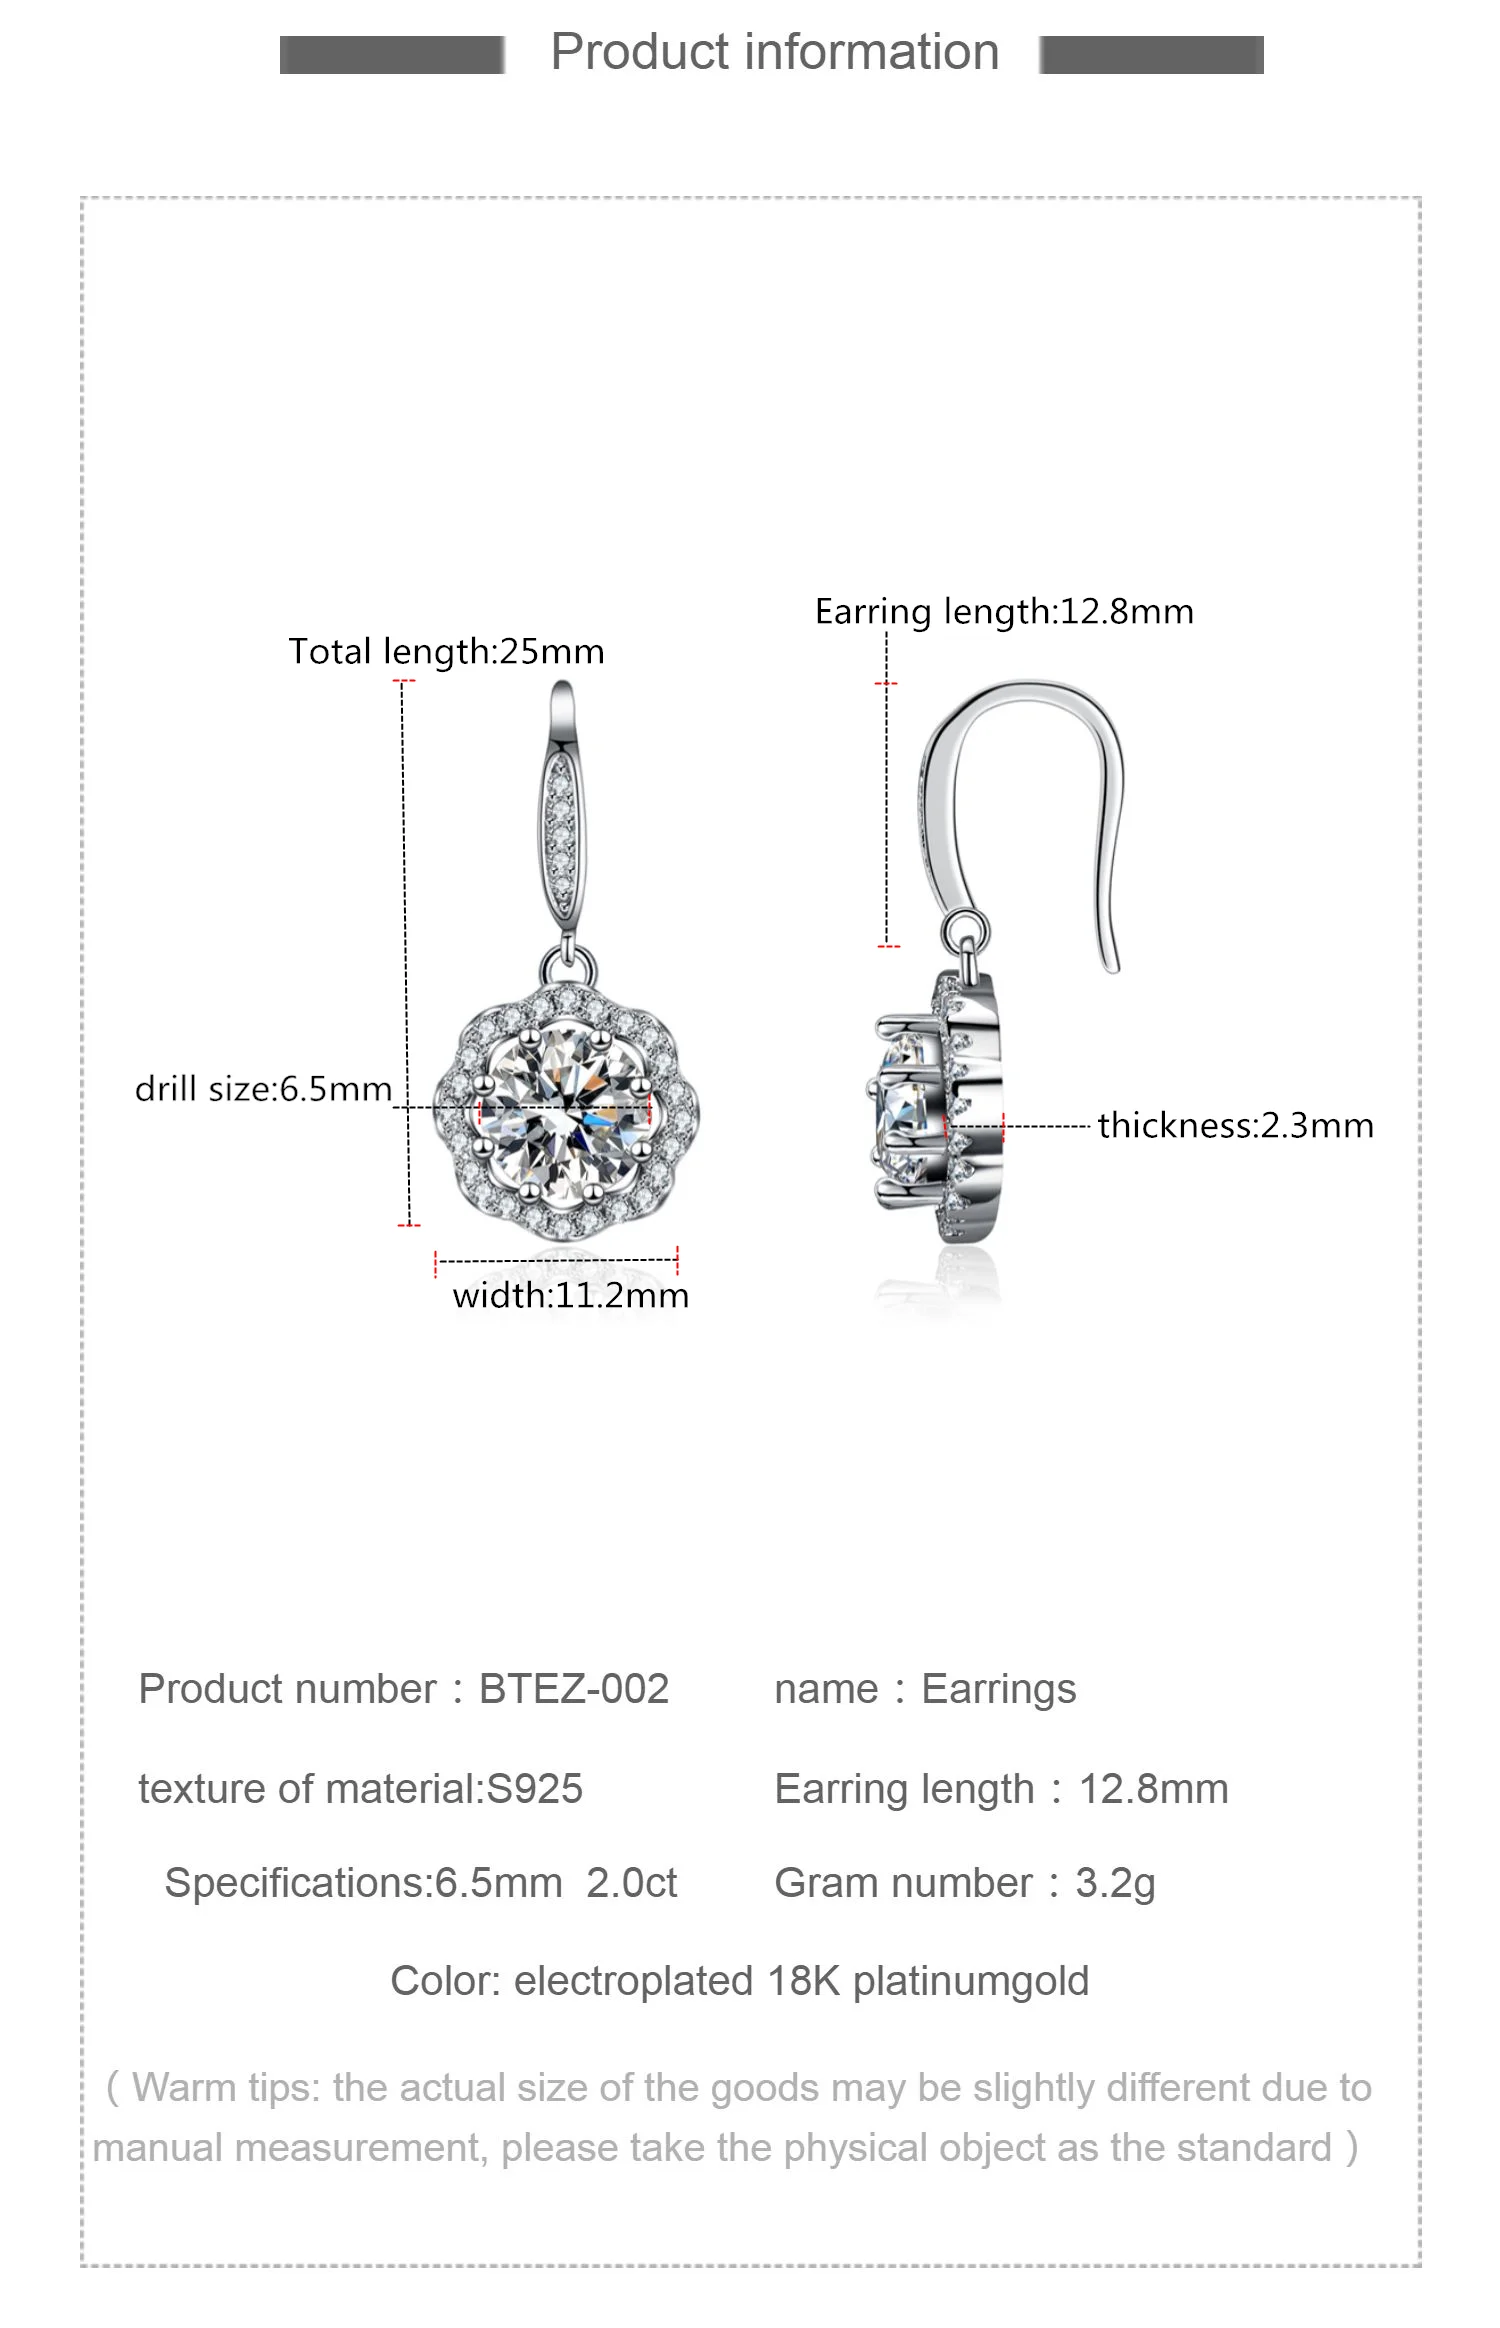 Hot selling S925 Sterling Silver Earrings for Women   Round Earrings, 1 Carat D-Color Mosonite Earrings for Marriage